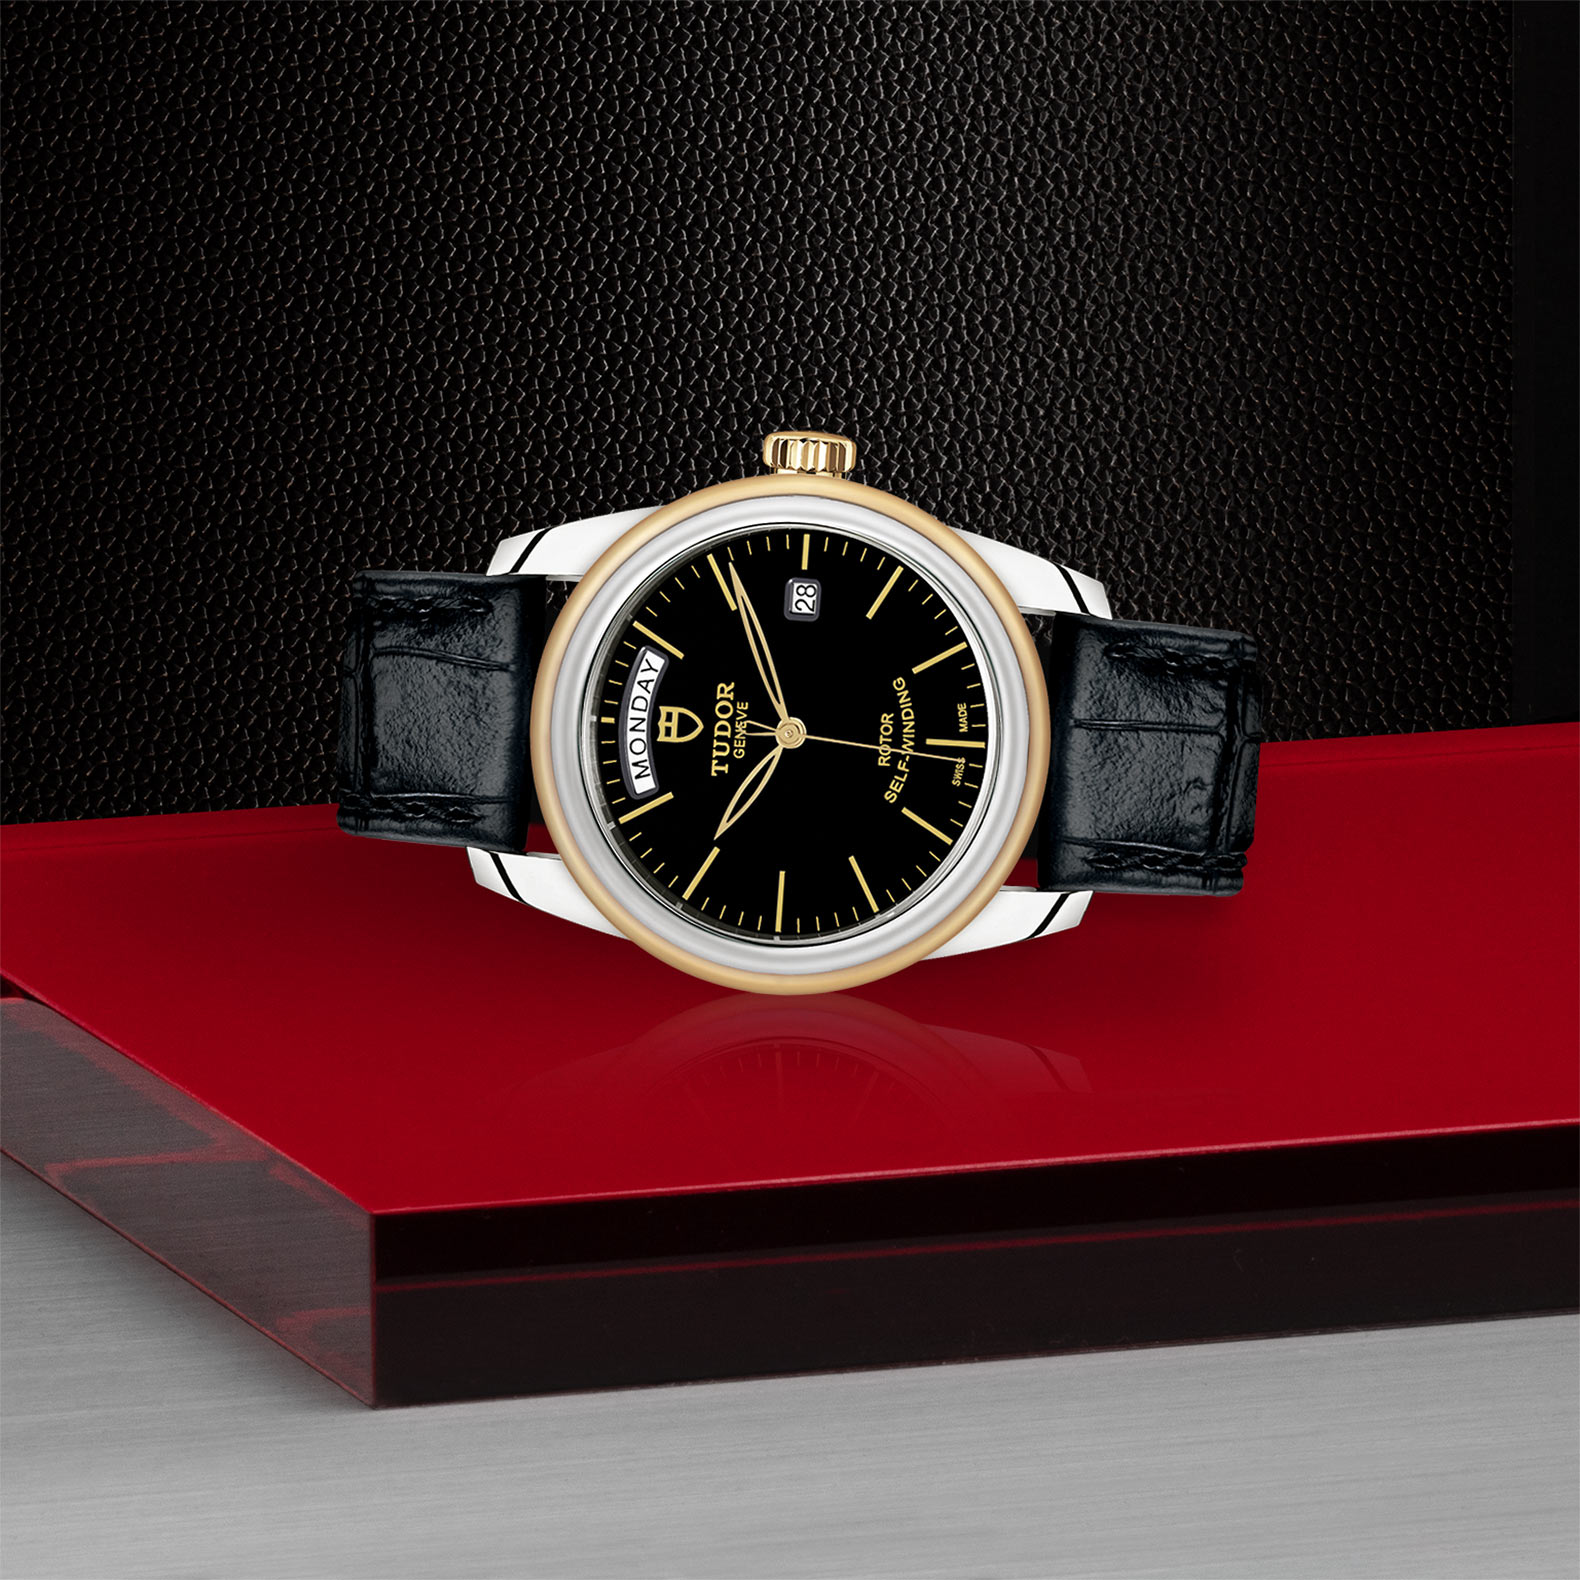 TUDOR Glamour Date+Day - M56003-0040